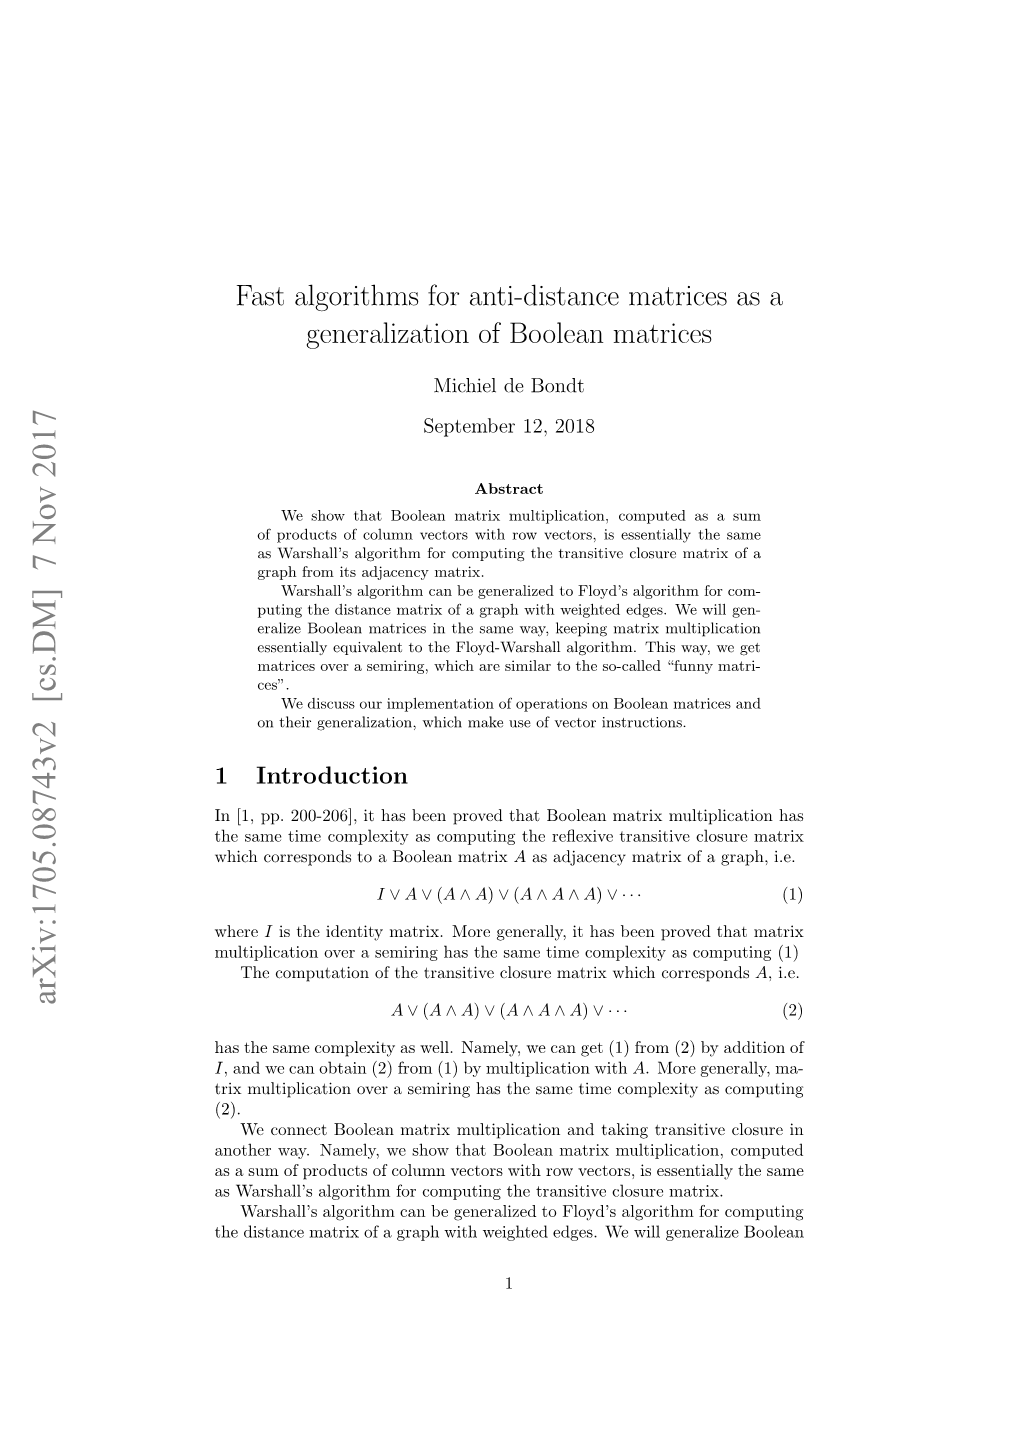 Fast Algorithms for Anti-Distance Matrices As a Generalization